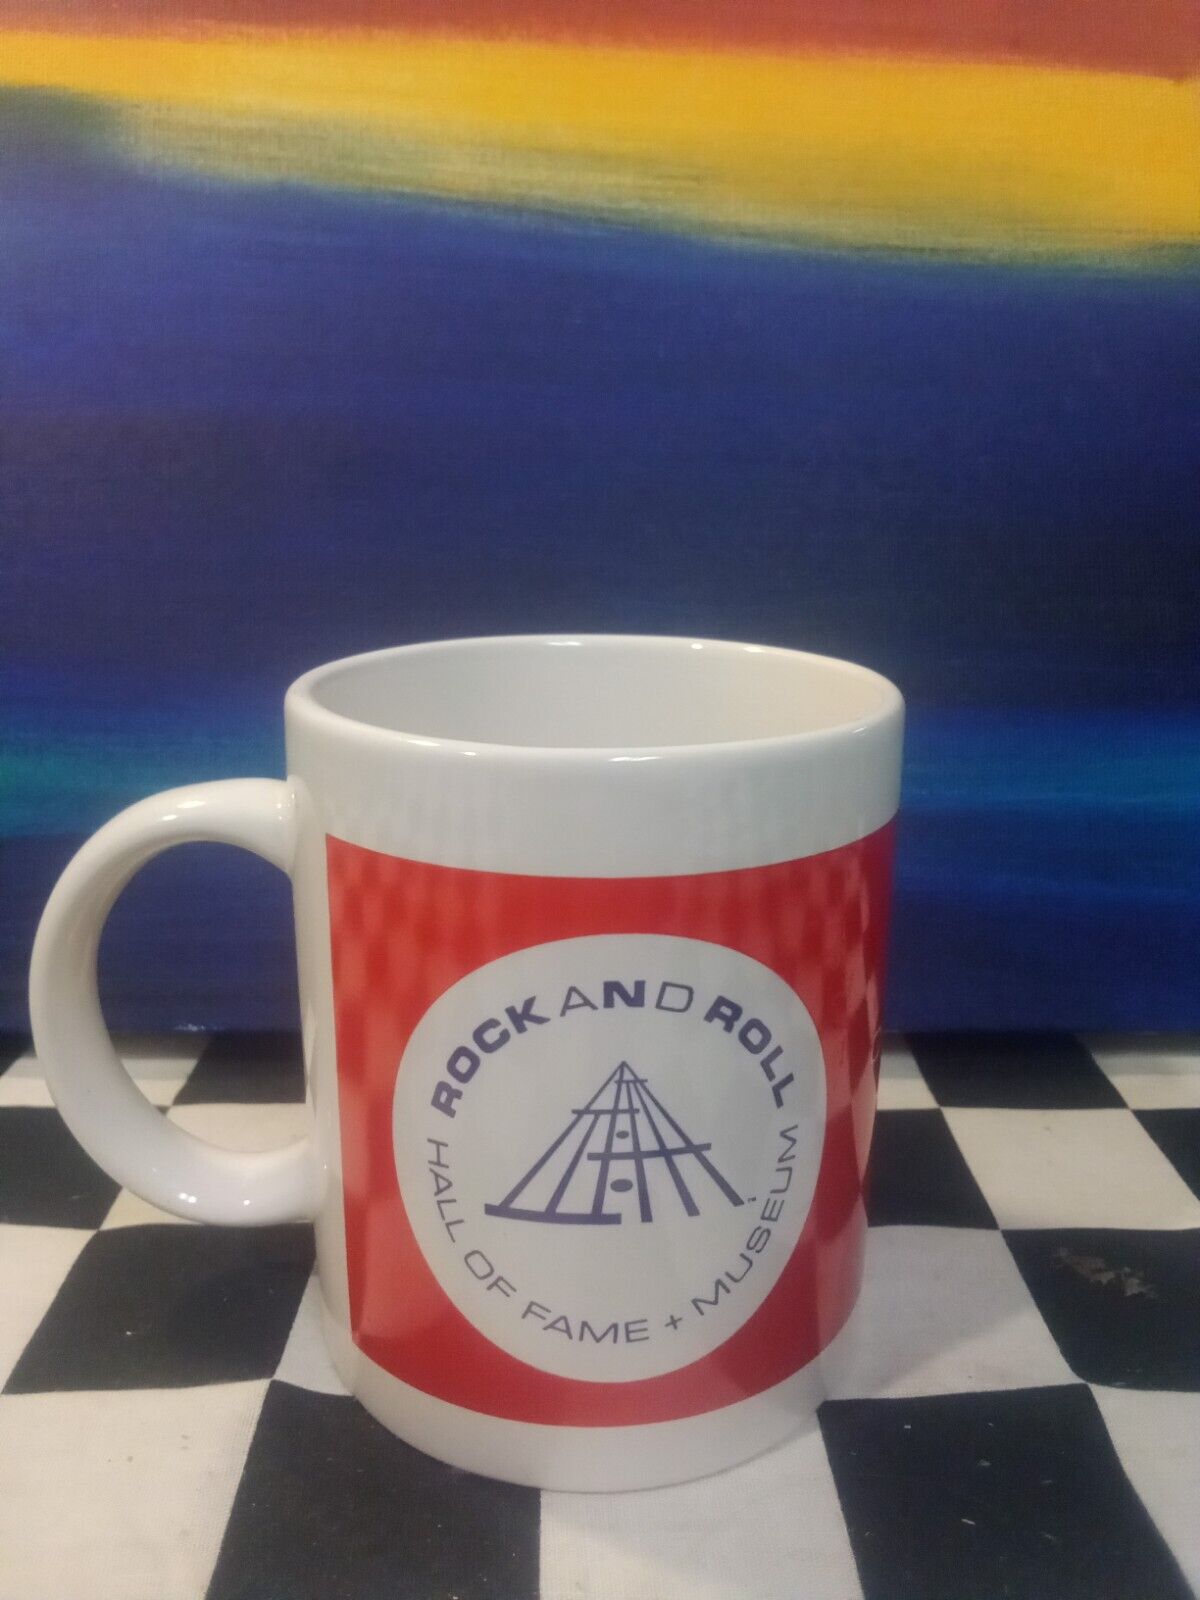 Rock and Roll Hall of Fame and Museum Cleveland Ohio Souvenir Coffee Mug